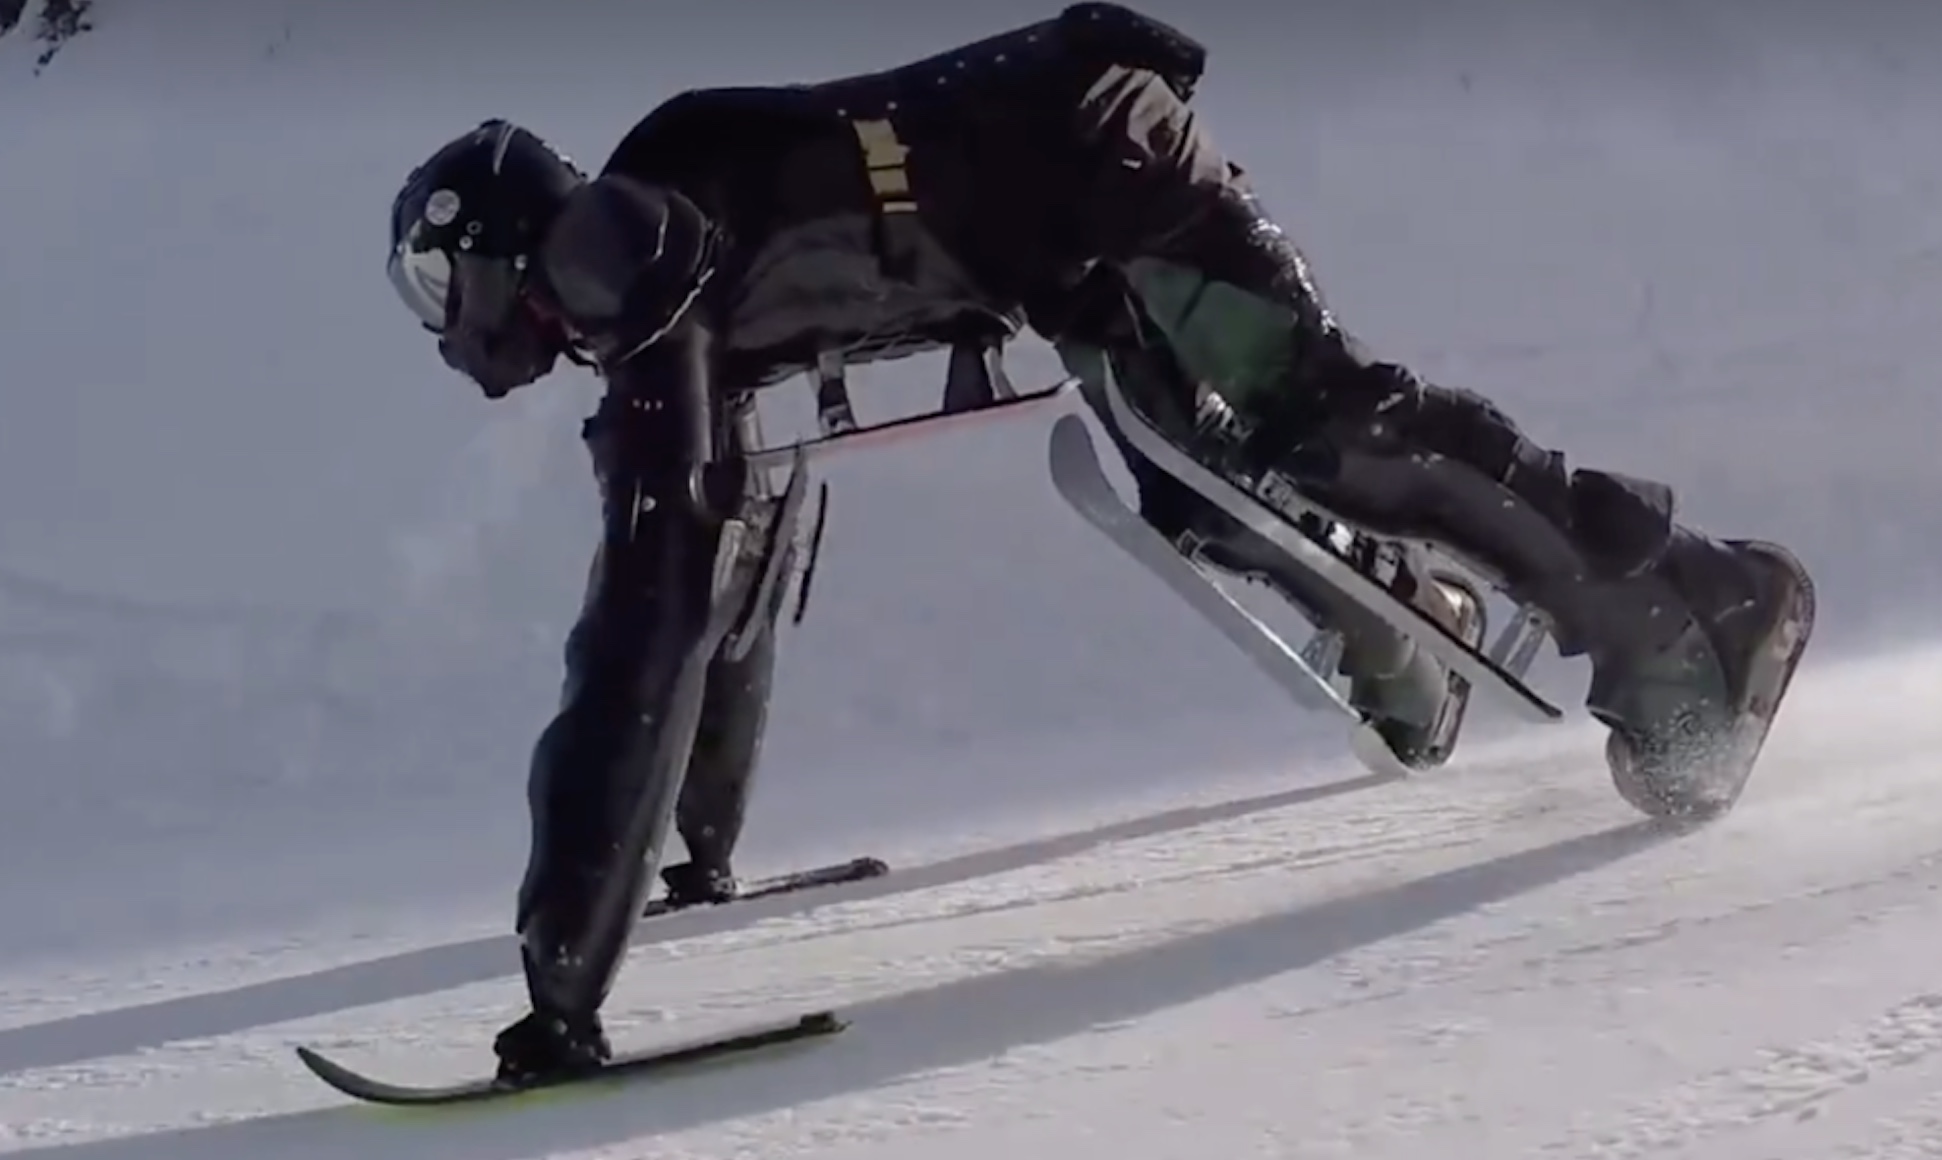 VIDEO: They Call This "Buggy-Skiing" In France